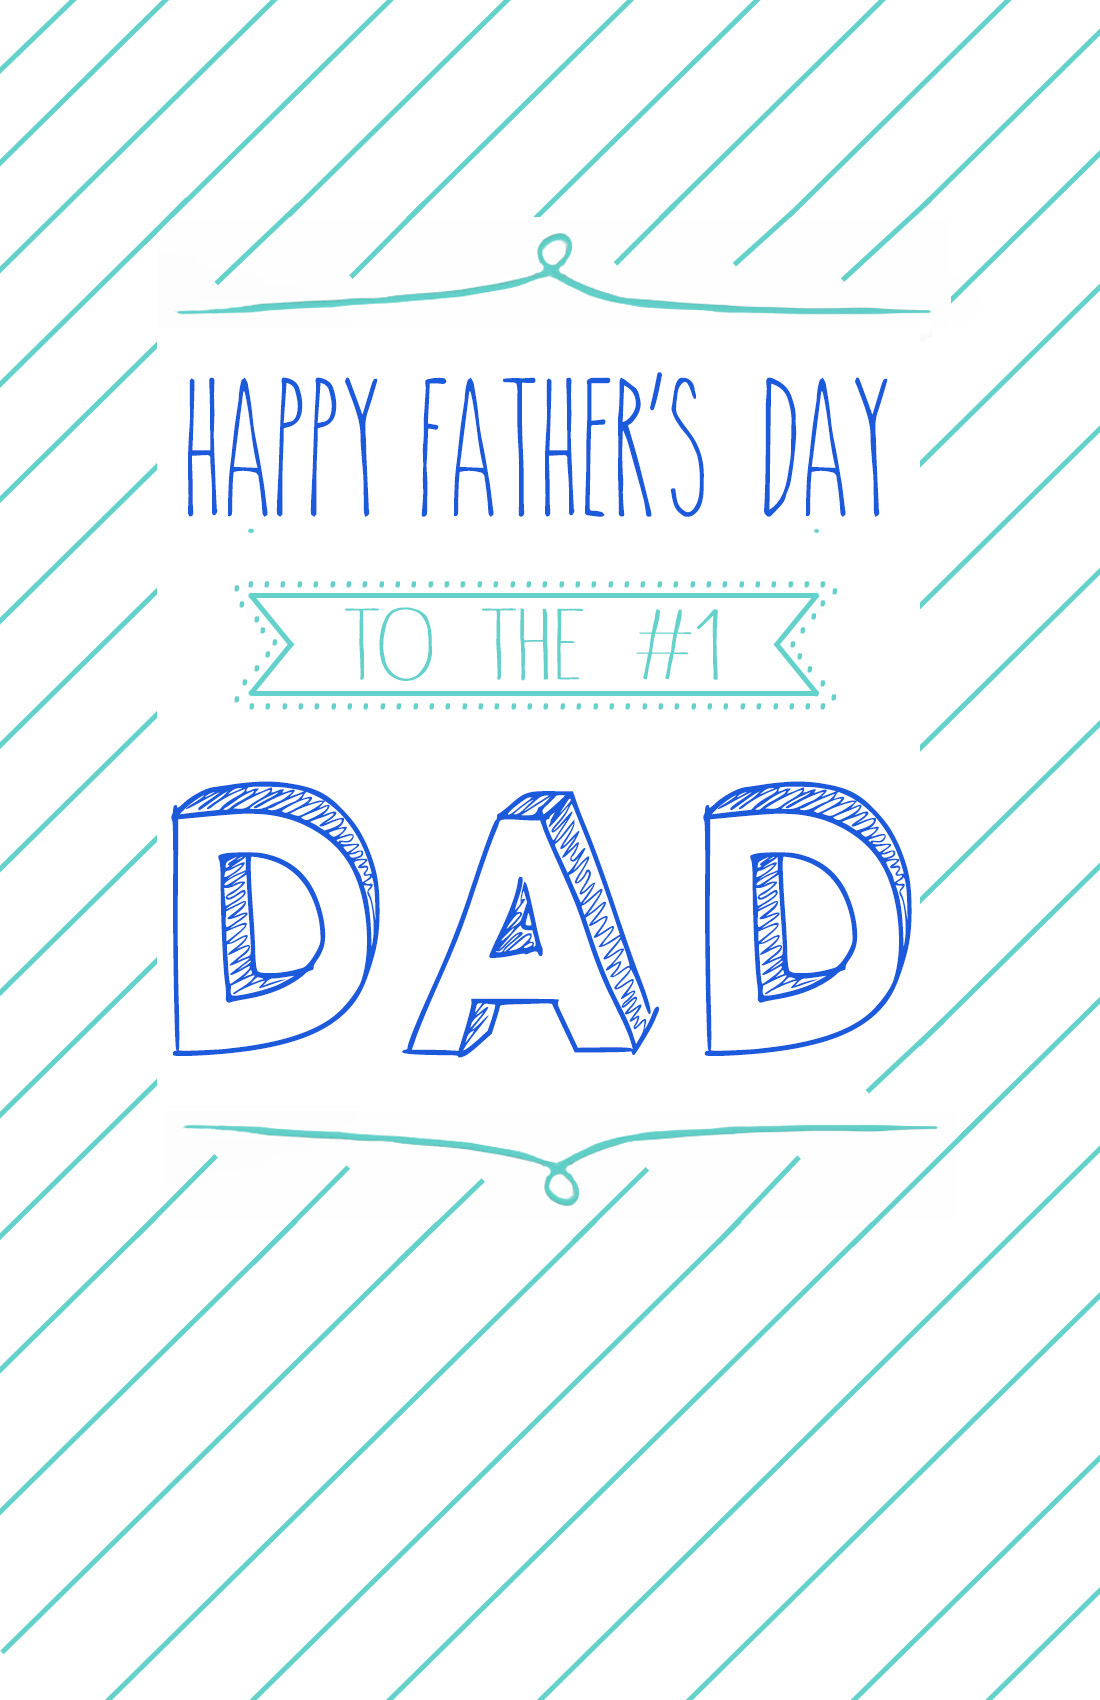 Free Printable Father s Day Cards